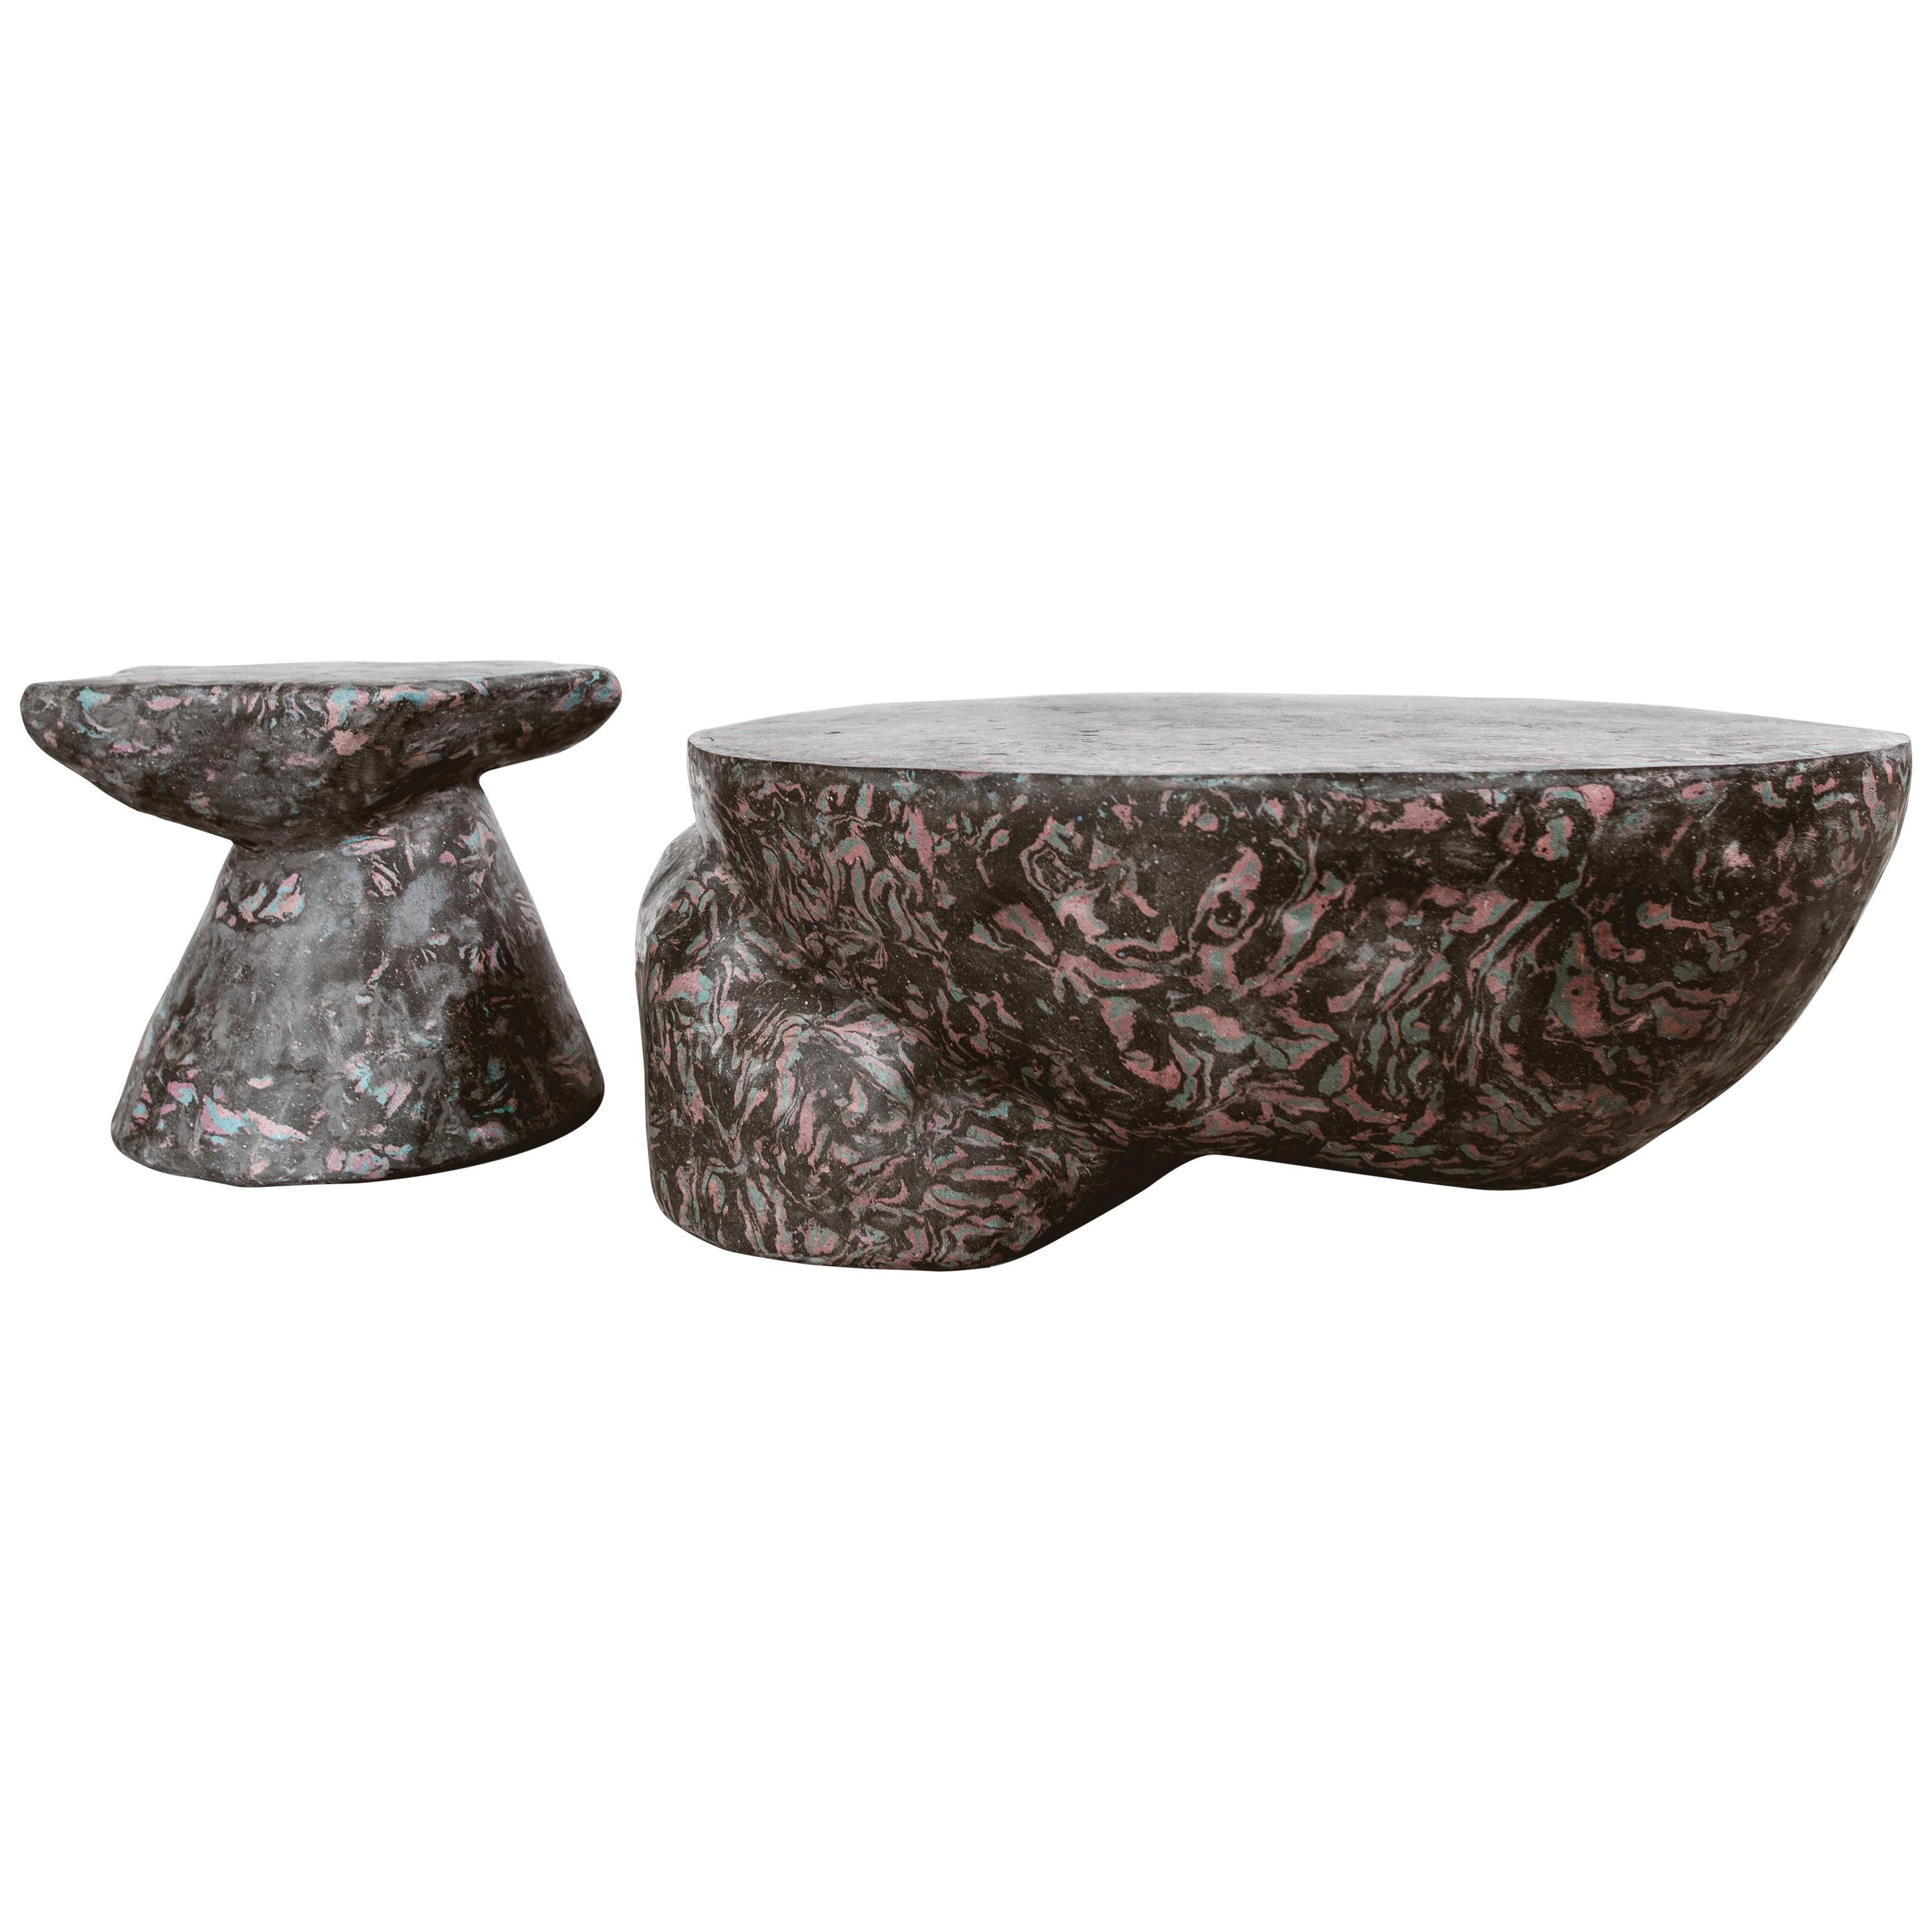 Plote and Prov Tables Set in Scagliola, Cement for Indoor or Outdoor by Mtharu im Angebot